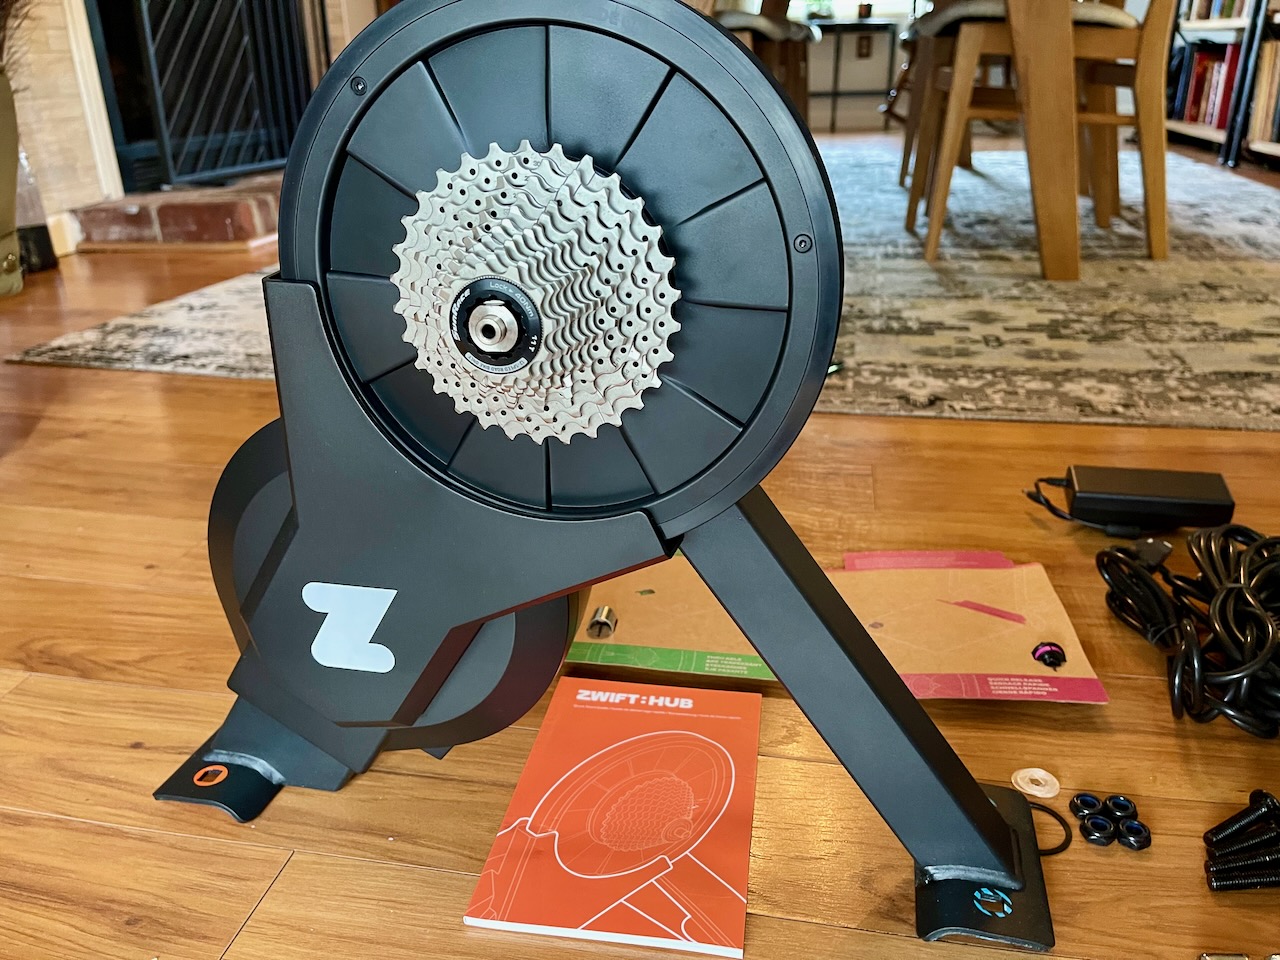 Zwift Hub Smart Cycling Trainer Review: An Affordable Way to Ride Indoors